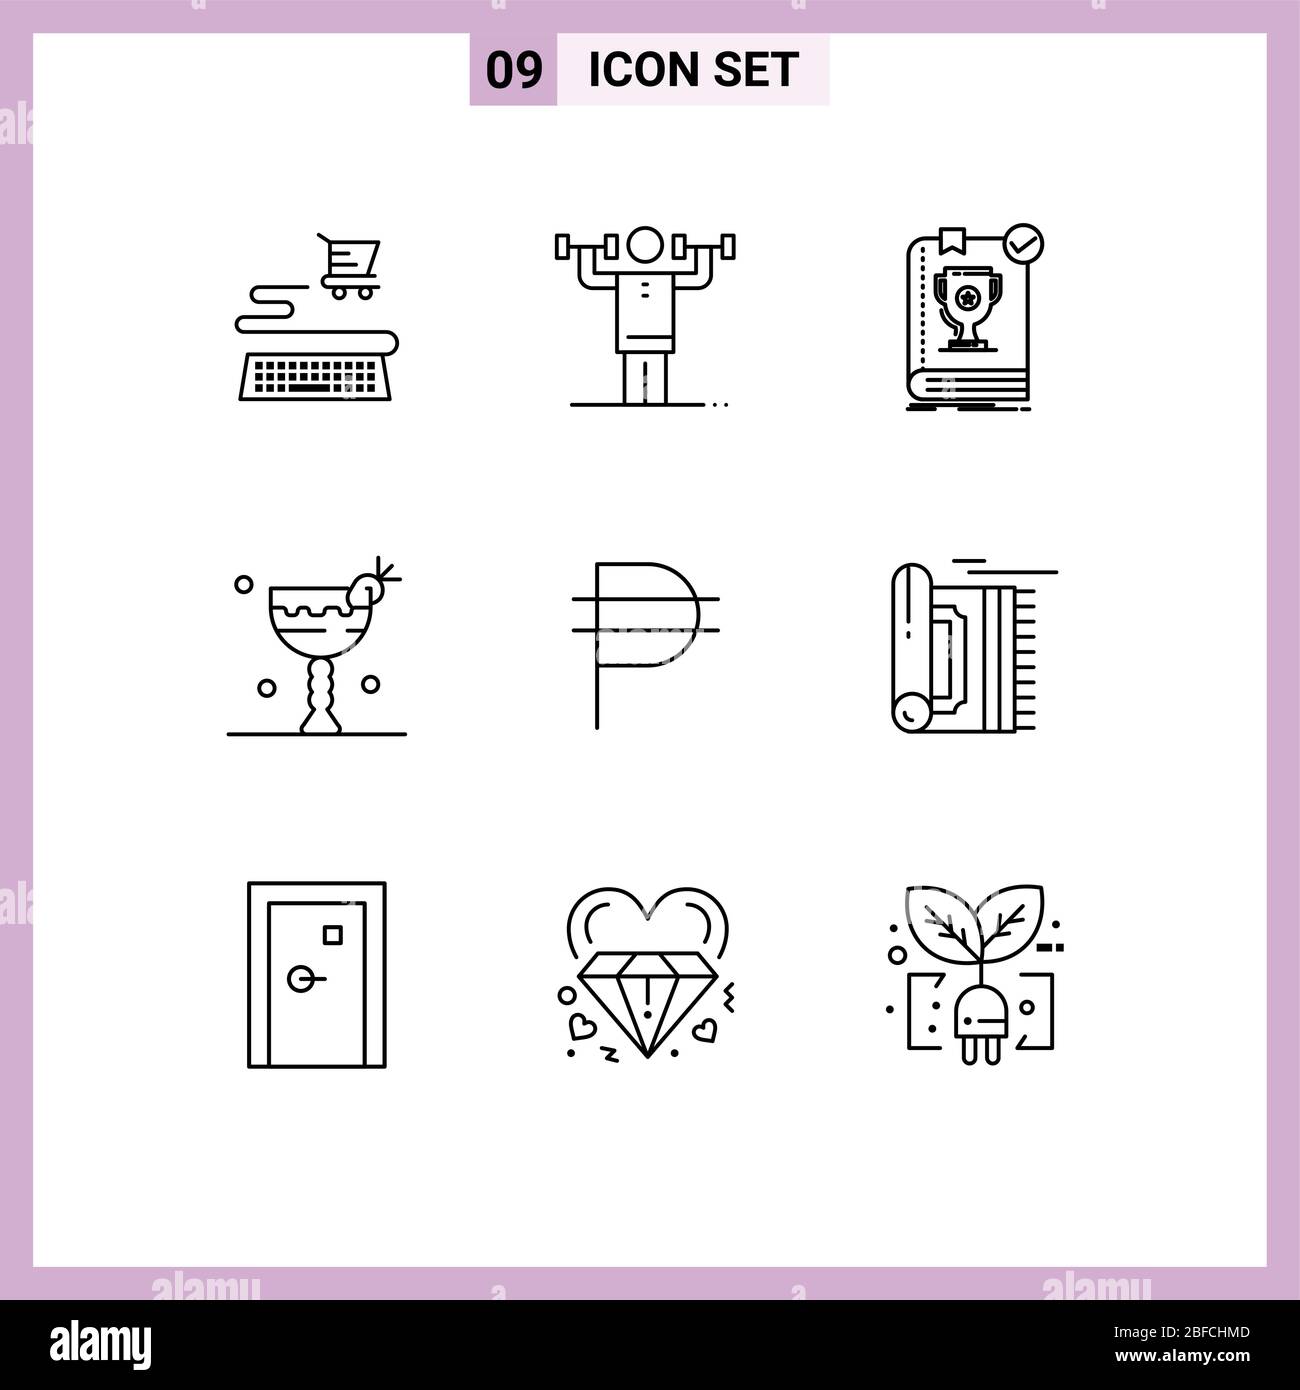 Set of 9 Modern UI Icons Symbols Signs for philippine, food, book, drink, rules Editable Vector Design Elements Stock Vector